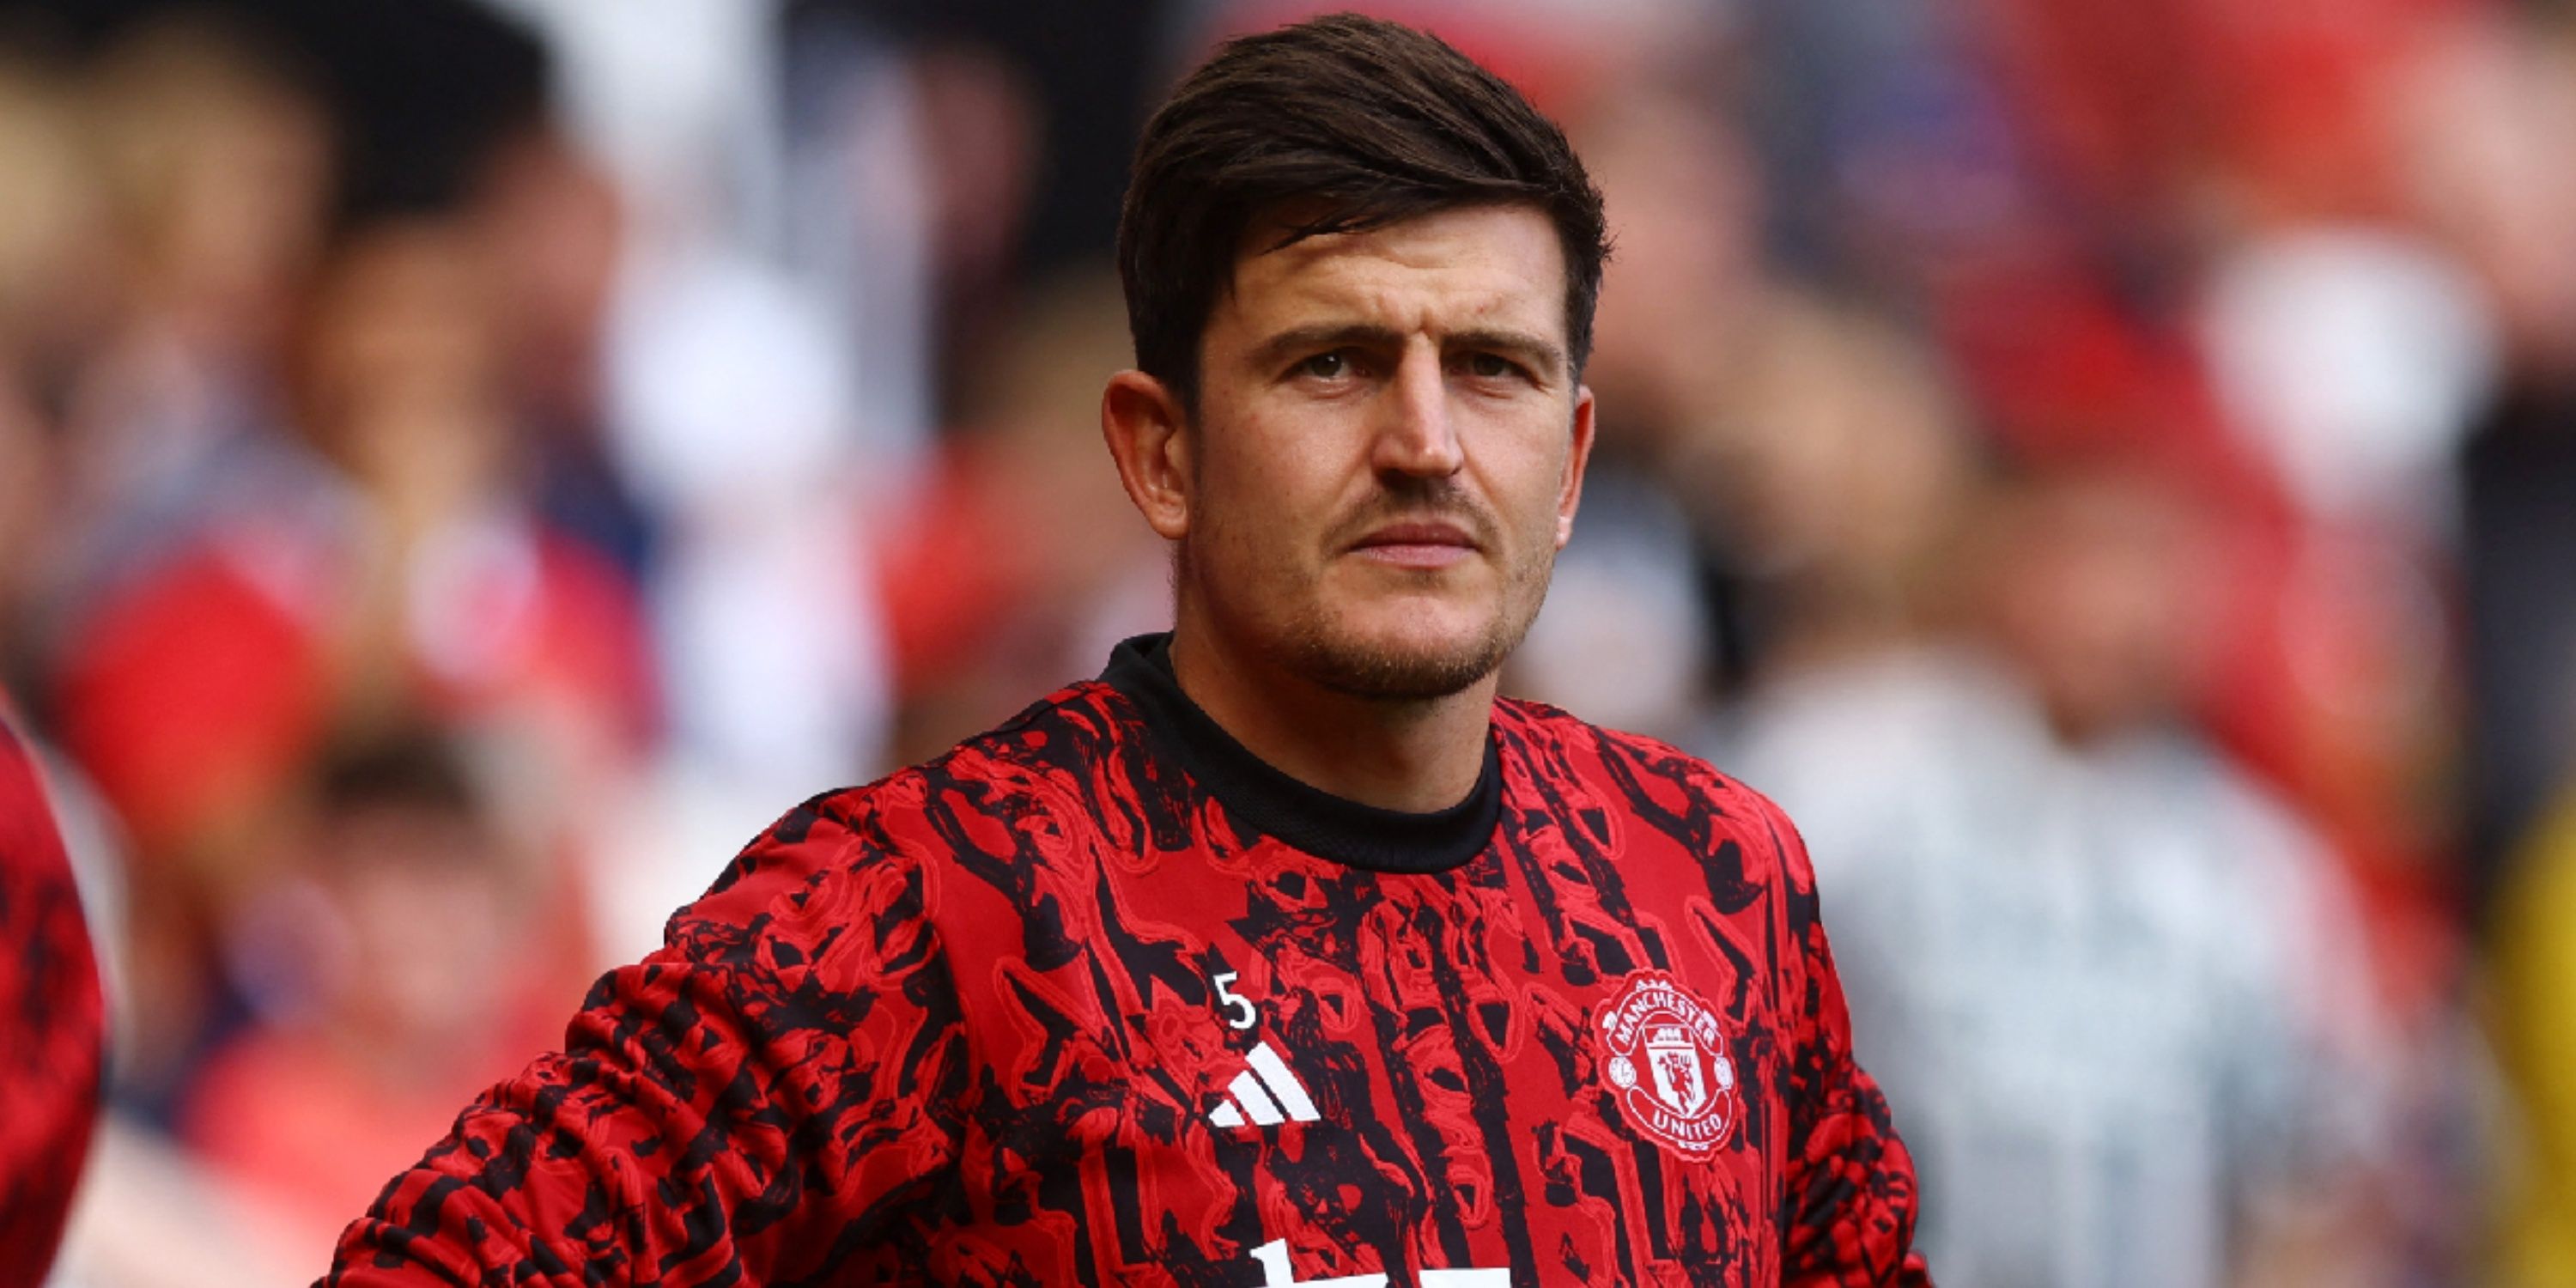 Harry Maguire has had 'unbelievable redemption arc' at Old Trafford